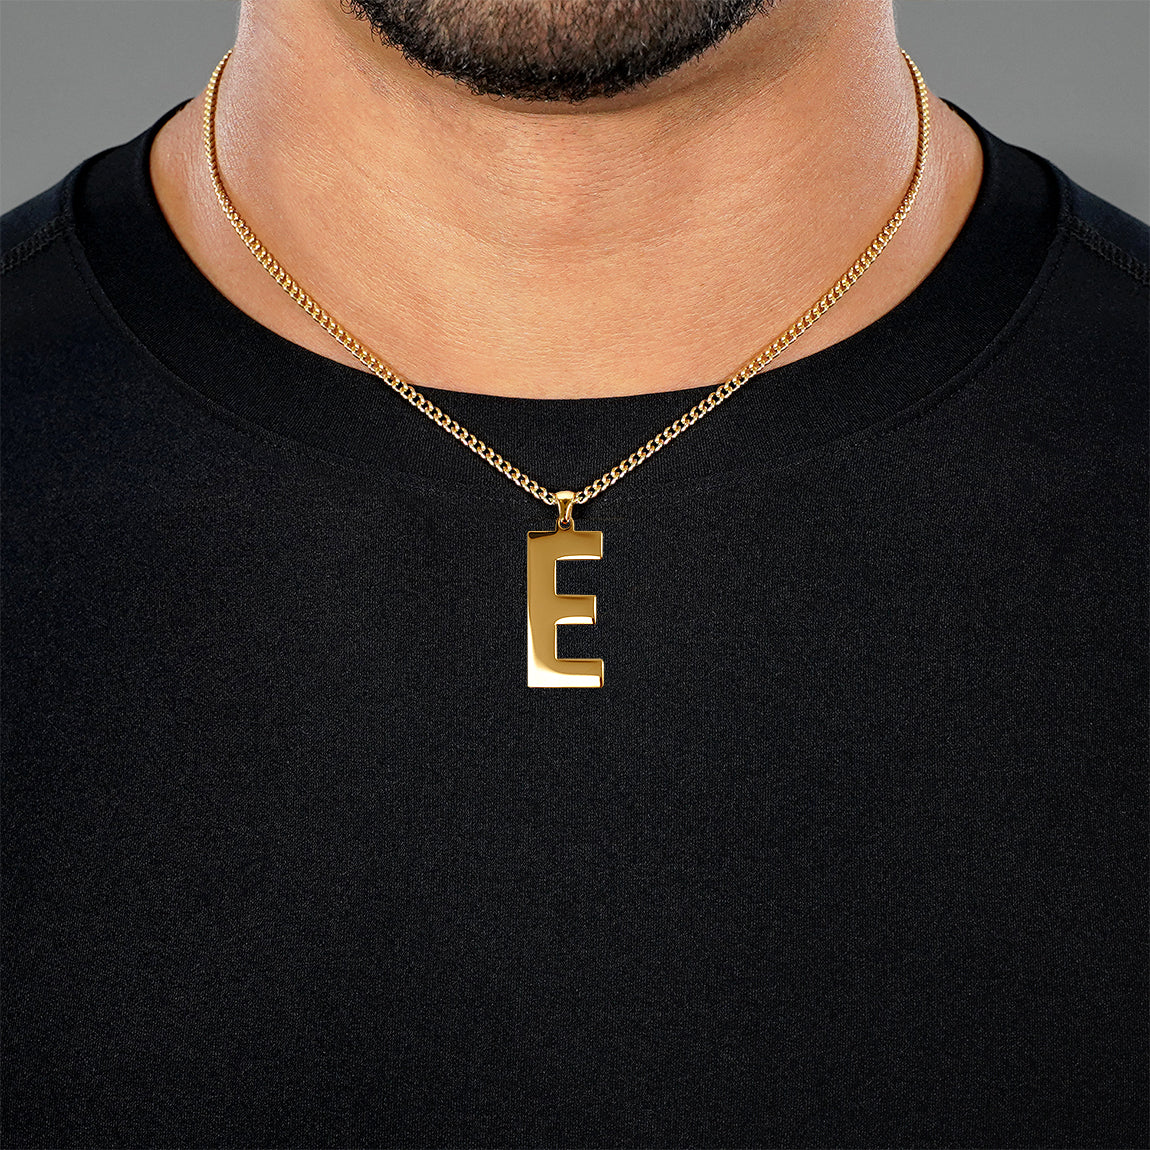 E Letter Pendant with Chain Necklace - Gold Plated Stainless Steel